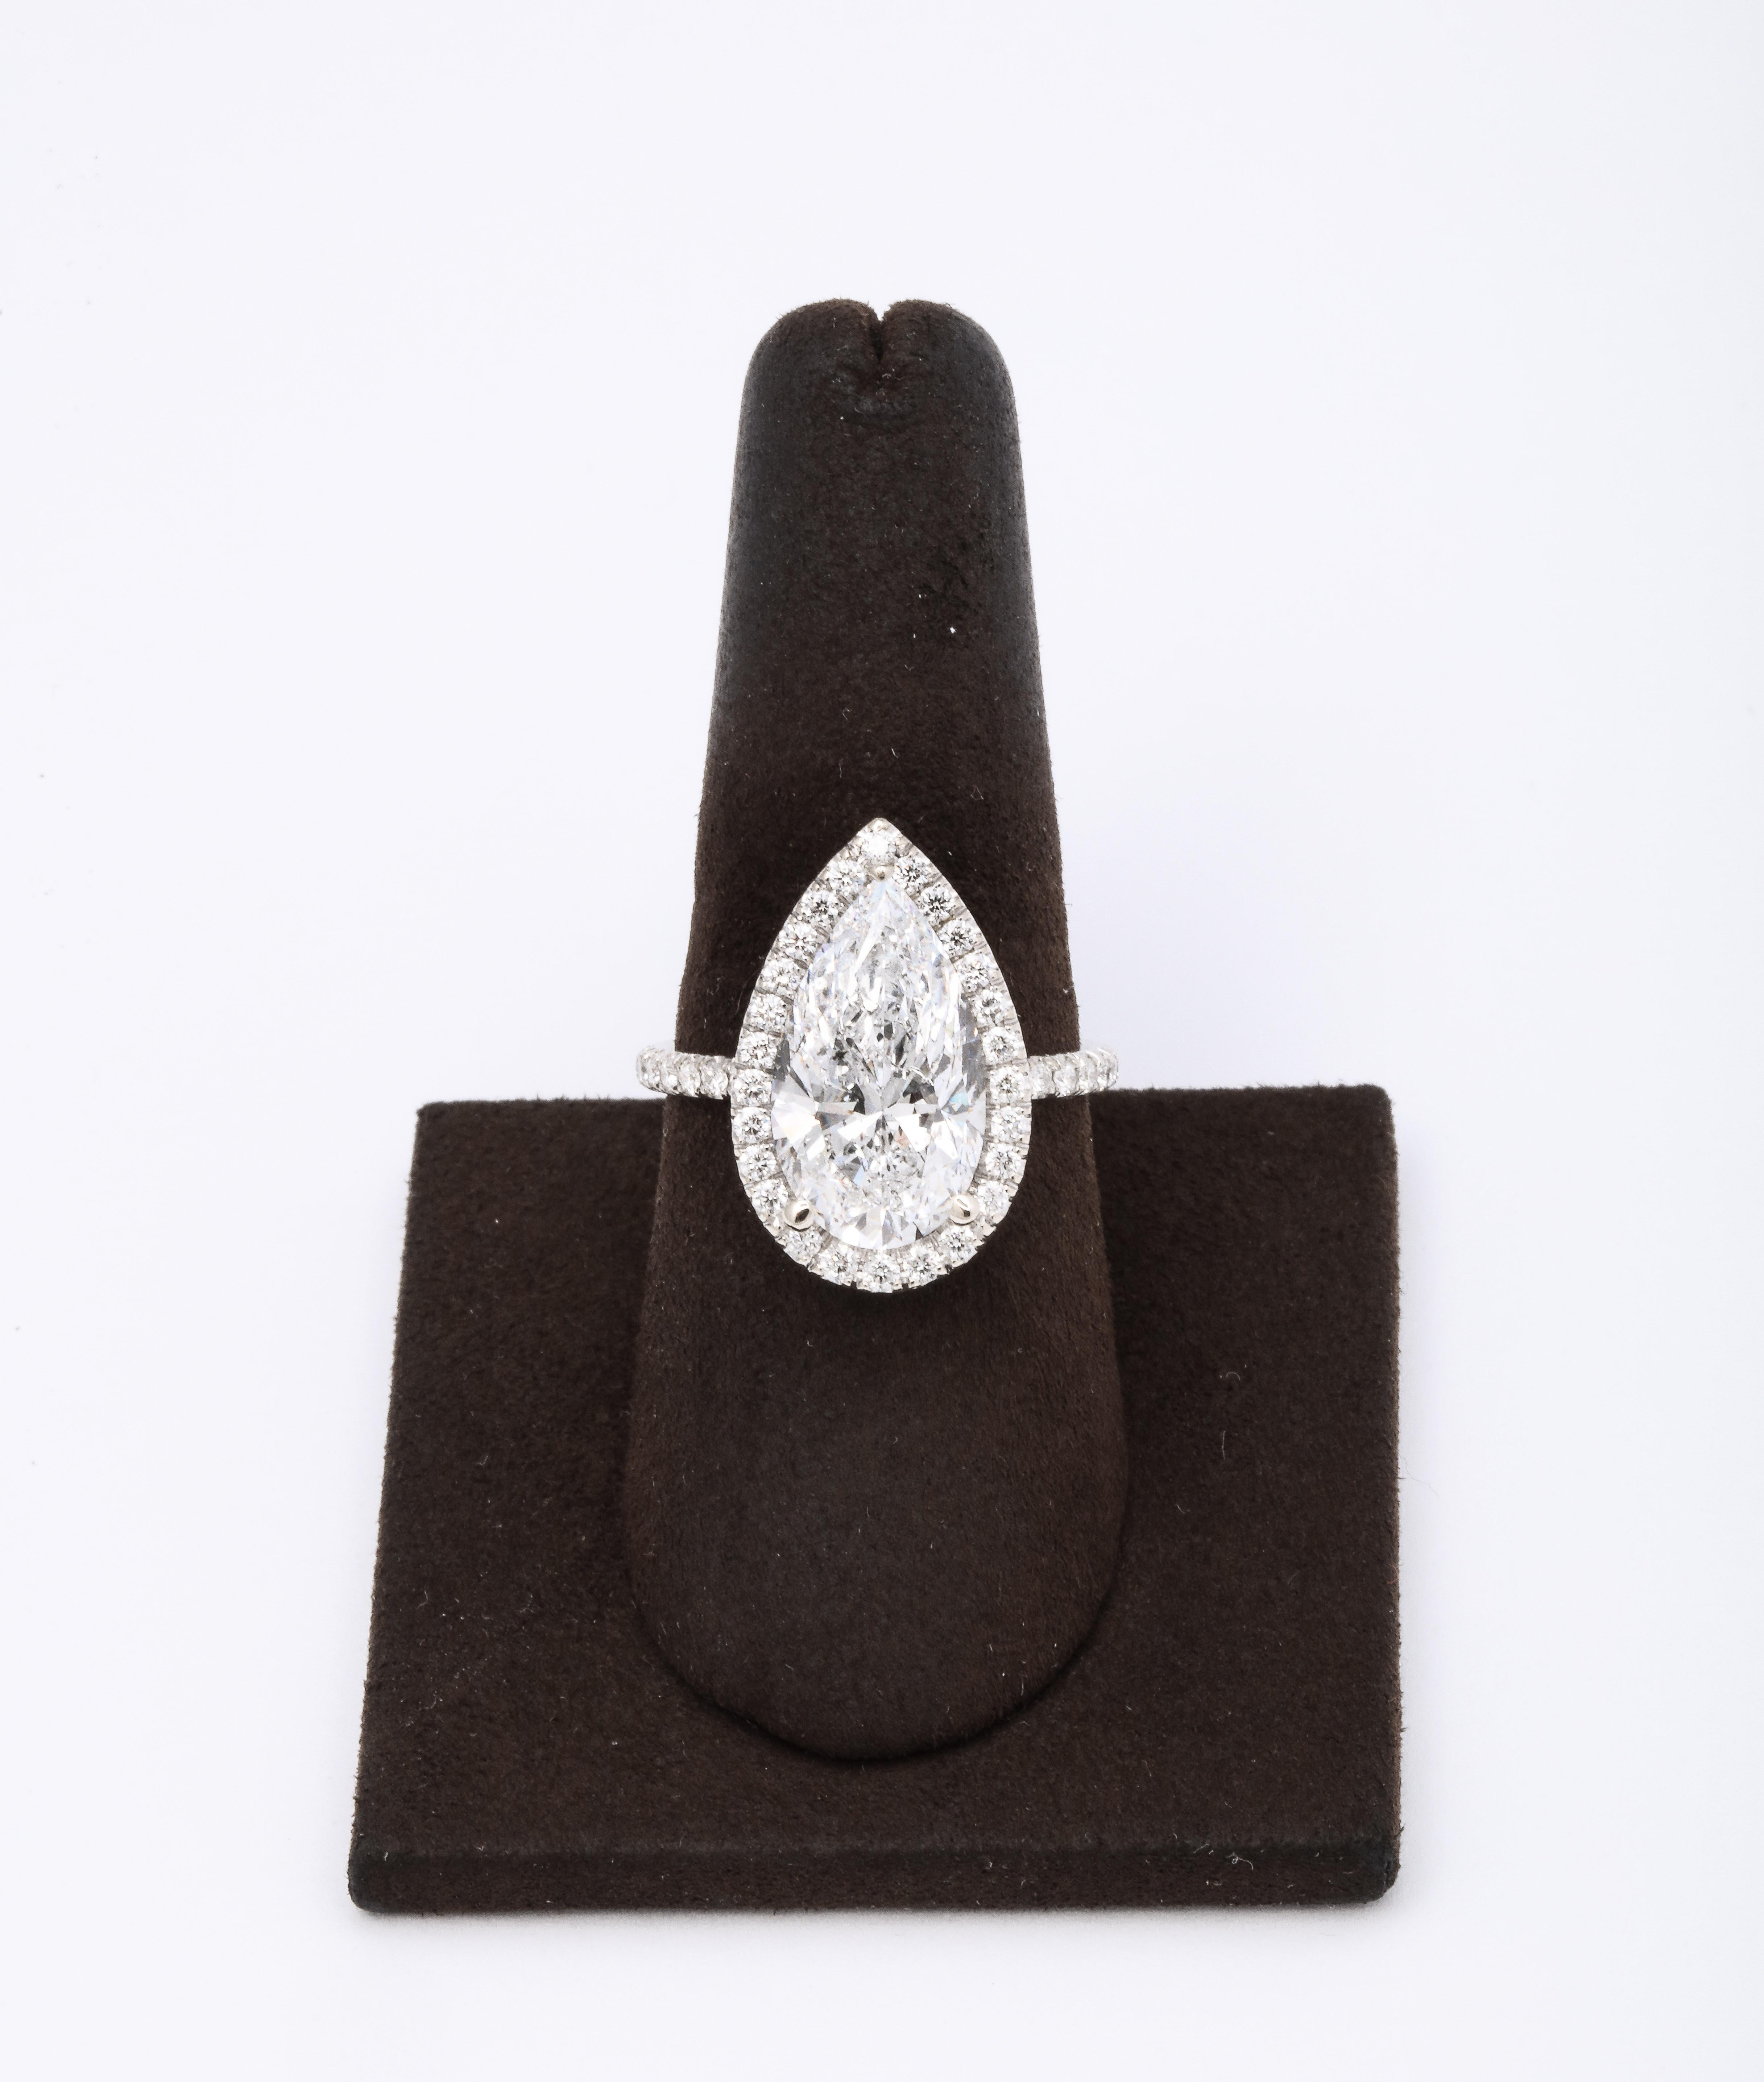 
The BEST color! 

GIA certified 5.21 carat D color I1 pear shape set in a platinum and diamond halo mounting with 1.35 carats of diamonds. 

The diamond is full of life and sparkle and is eye clean. 

A beautifully cut pear diamond with ideal